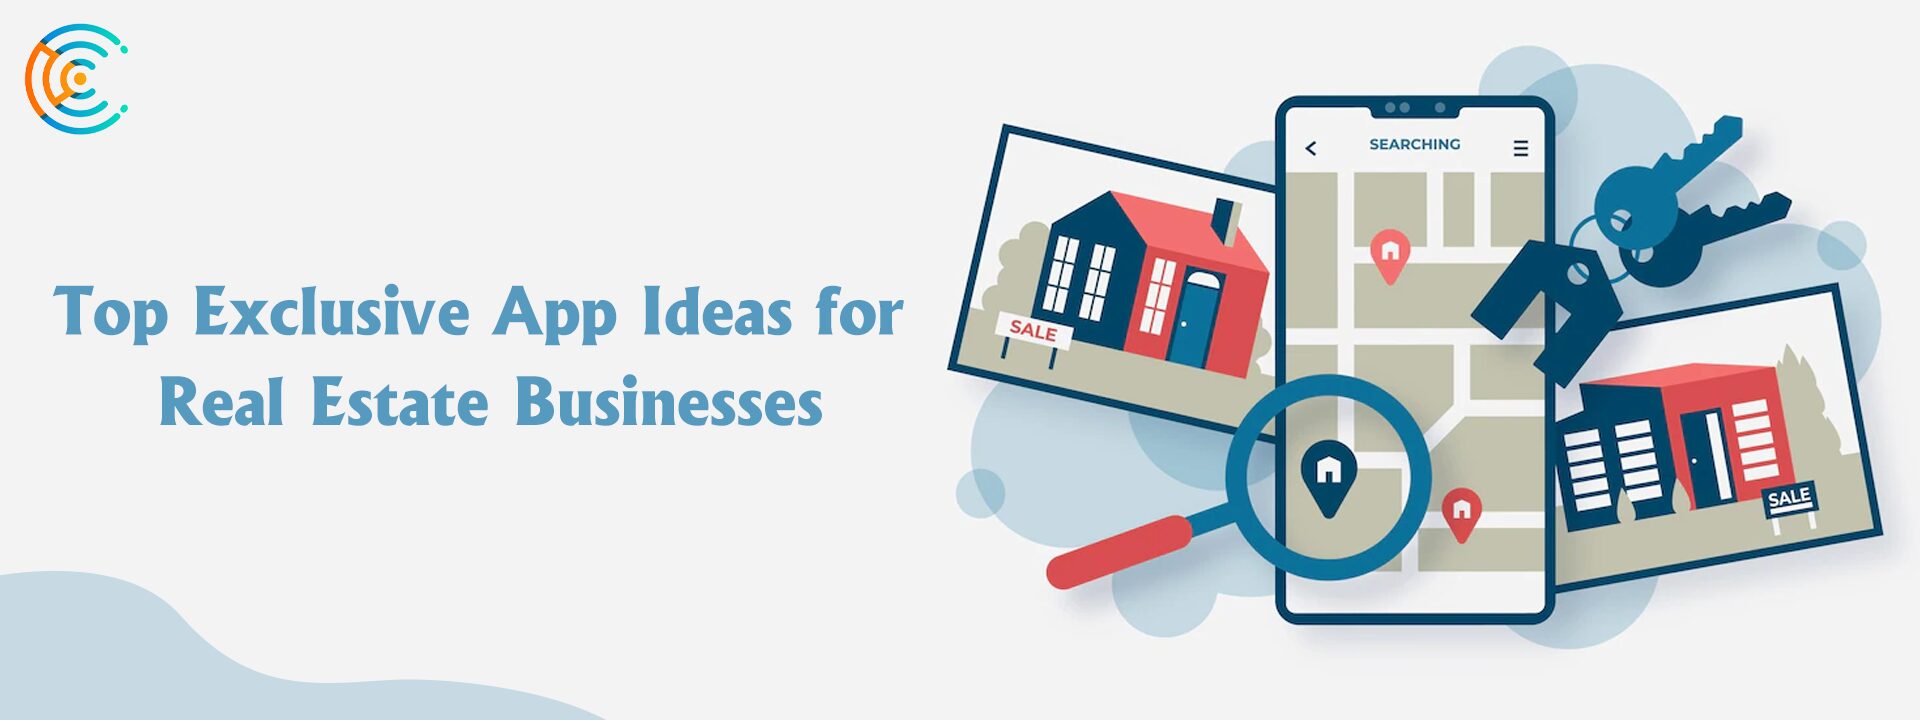 Exclusive App Ideas for Real Estate Businesses